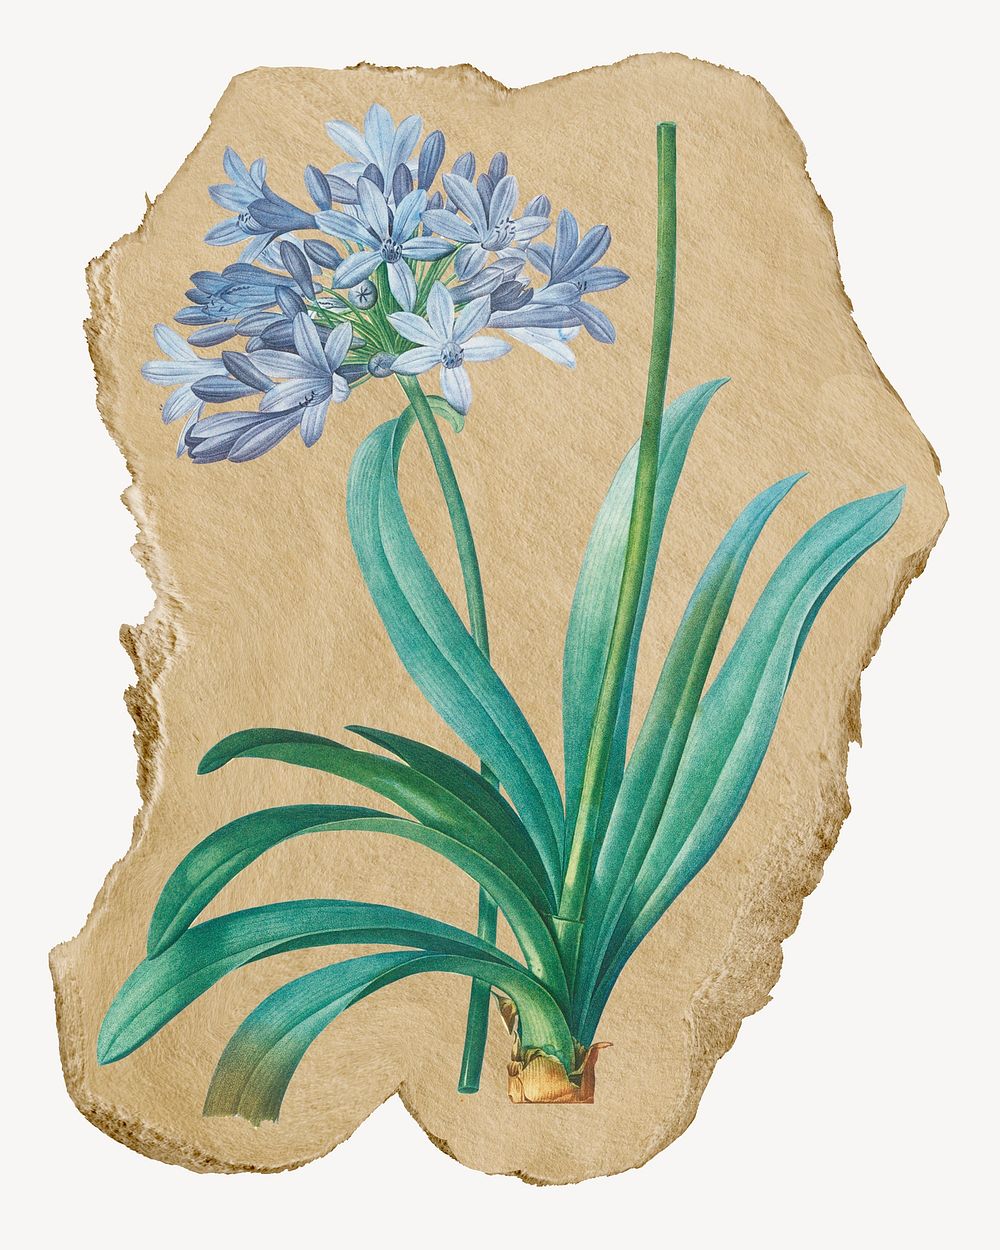 Blue flower illustration, ripped paper collage element